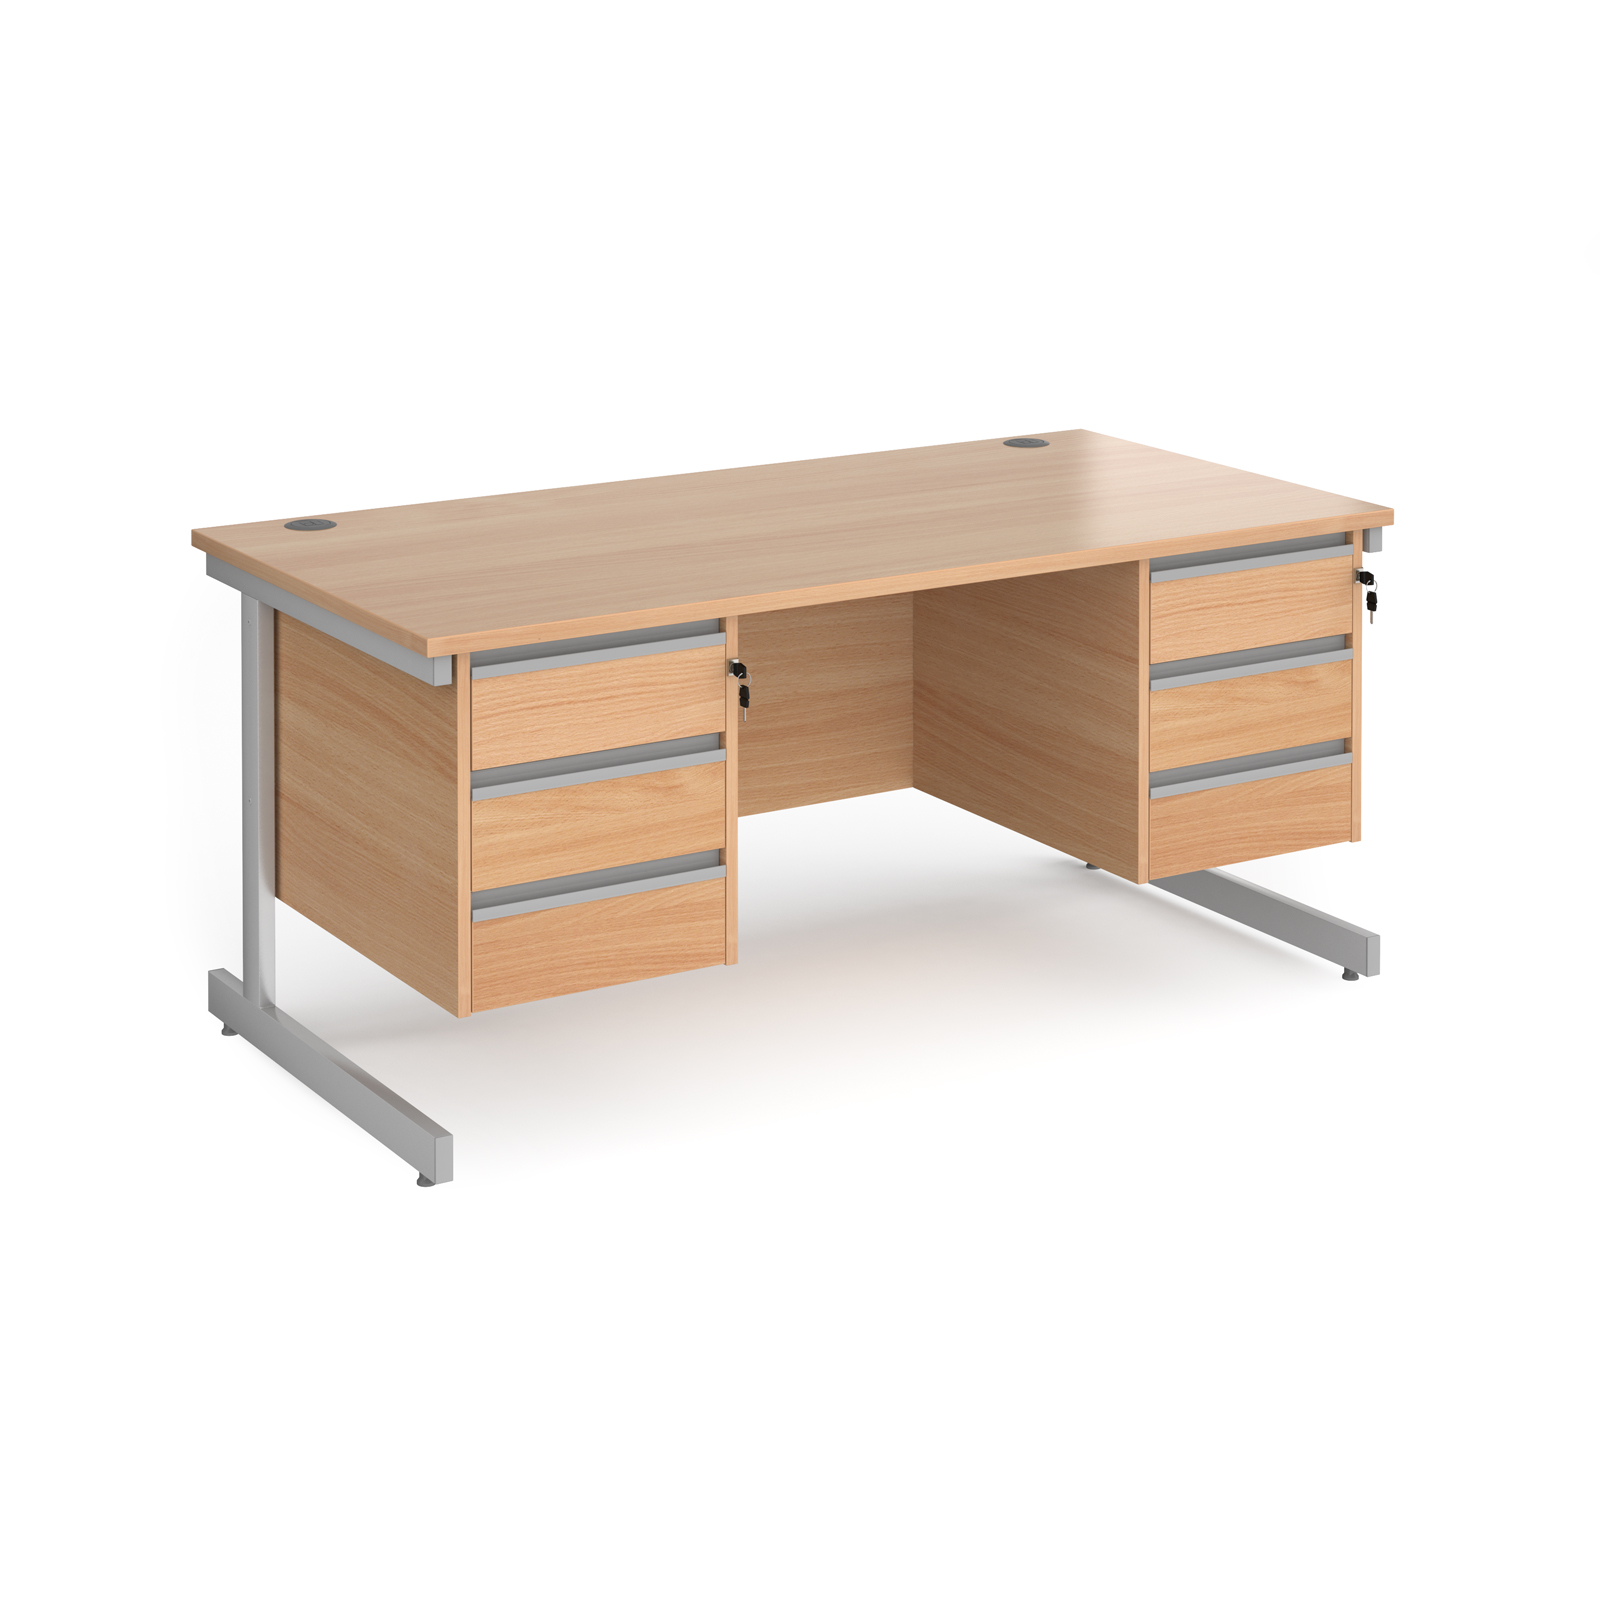 Contract 25 Canitlever Leg Straight Desk with Two 3 Drawer Pedestals